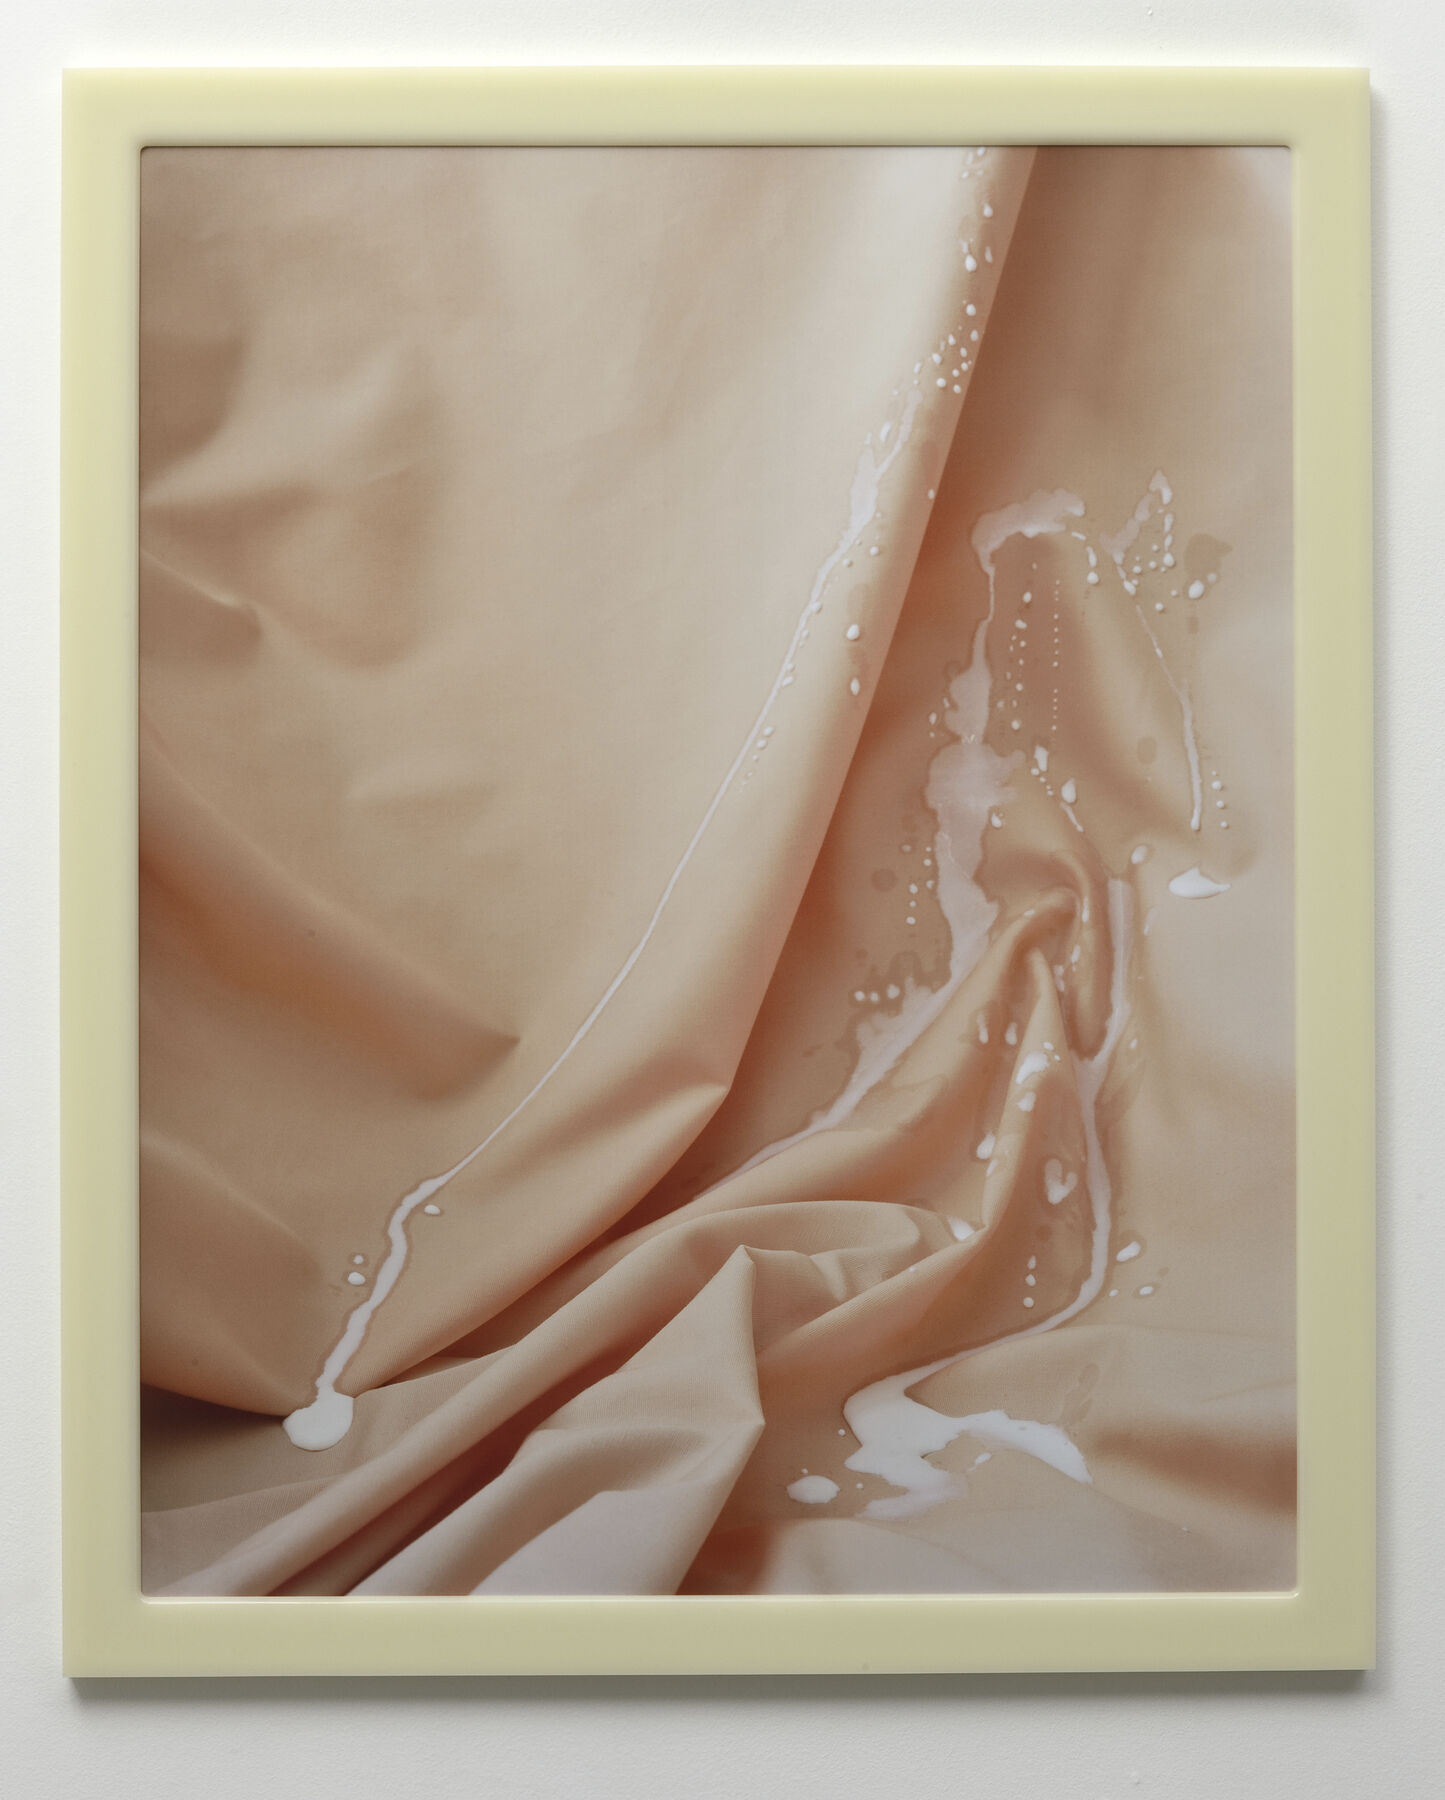 Print of white liquid droplets carving path down pinkish-peach cloth with crinkles (inside cream frame)